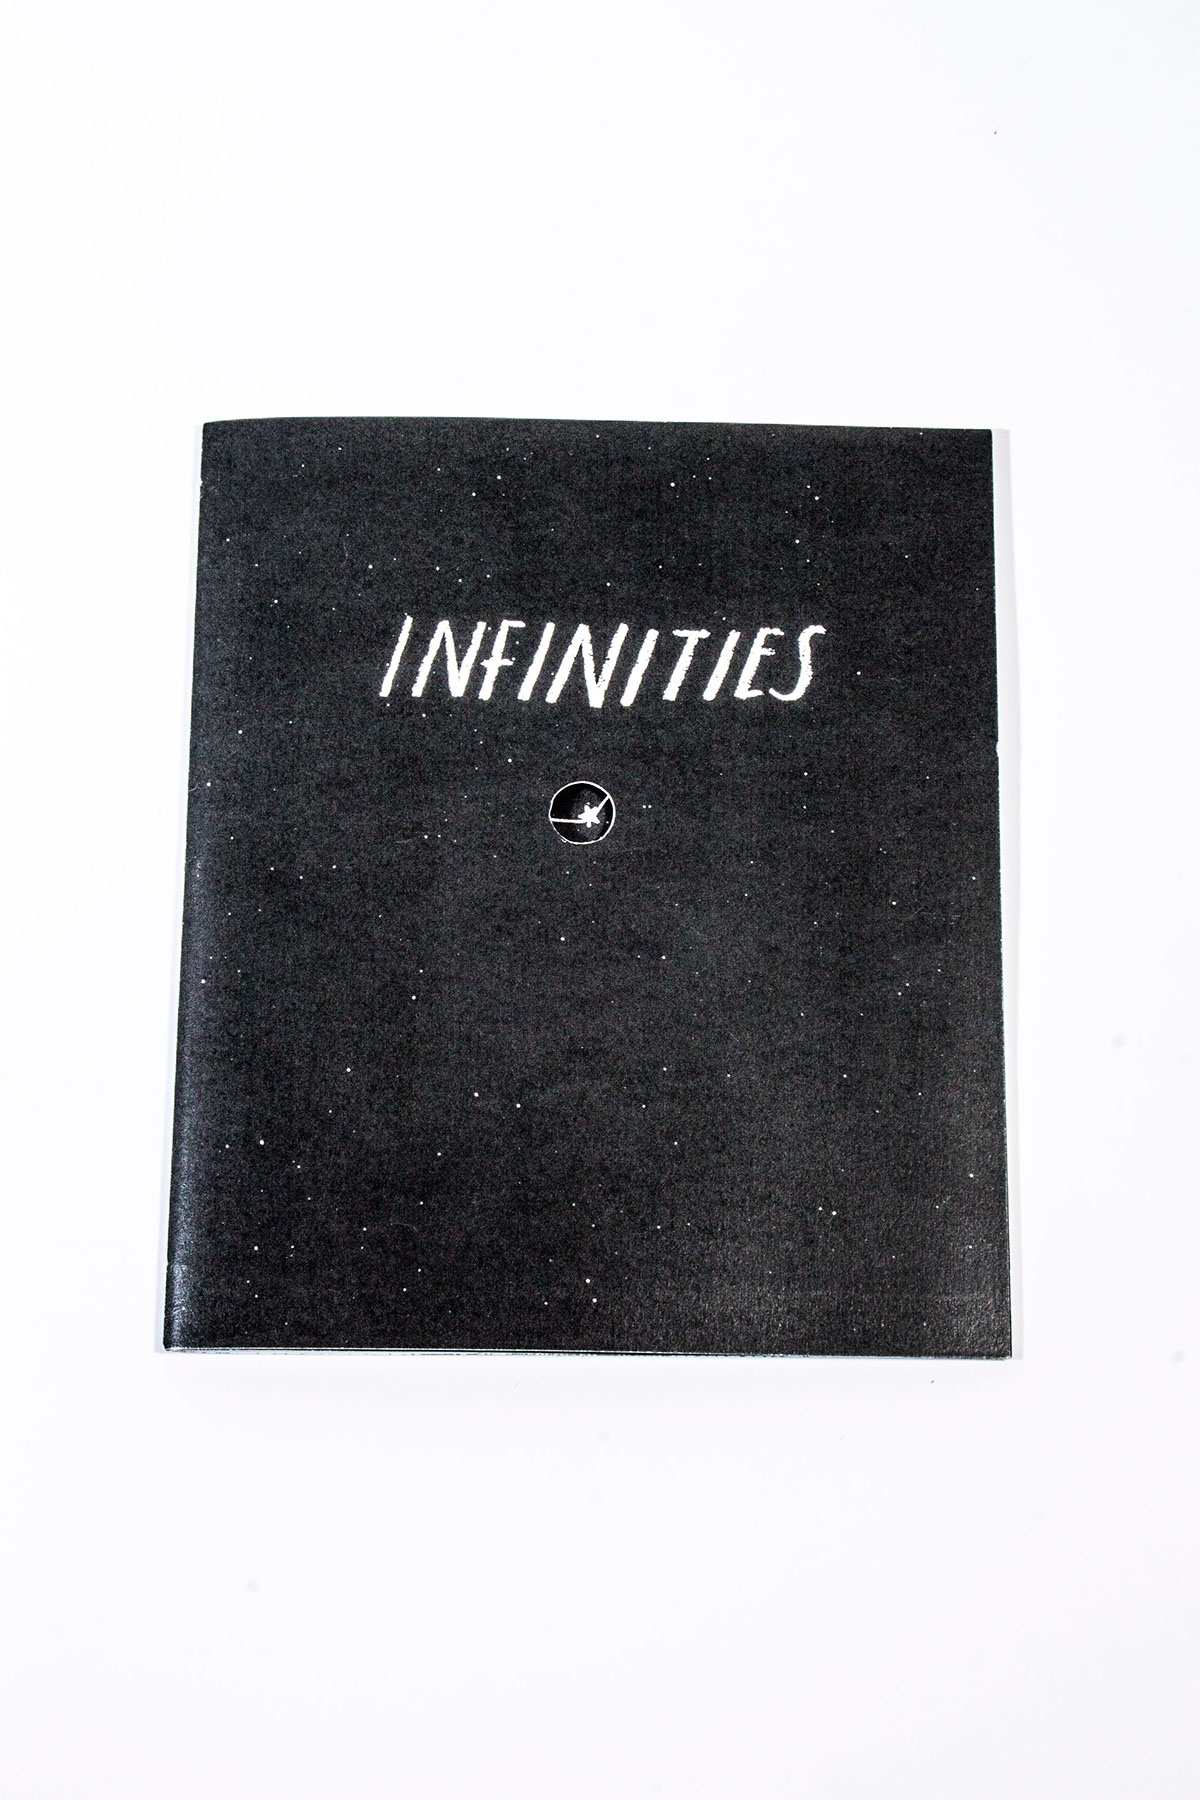 book monochrome infinity worlds black and white holes Scenes stars